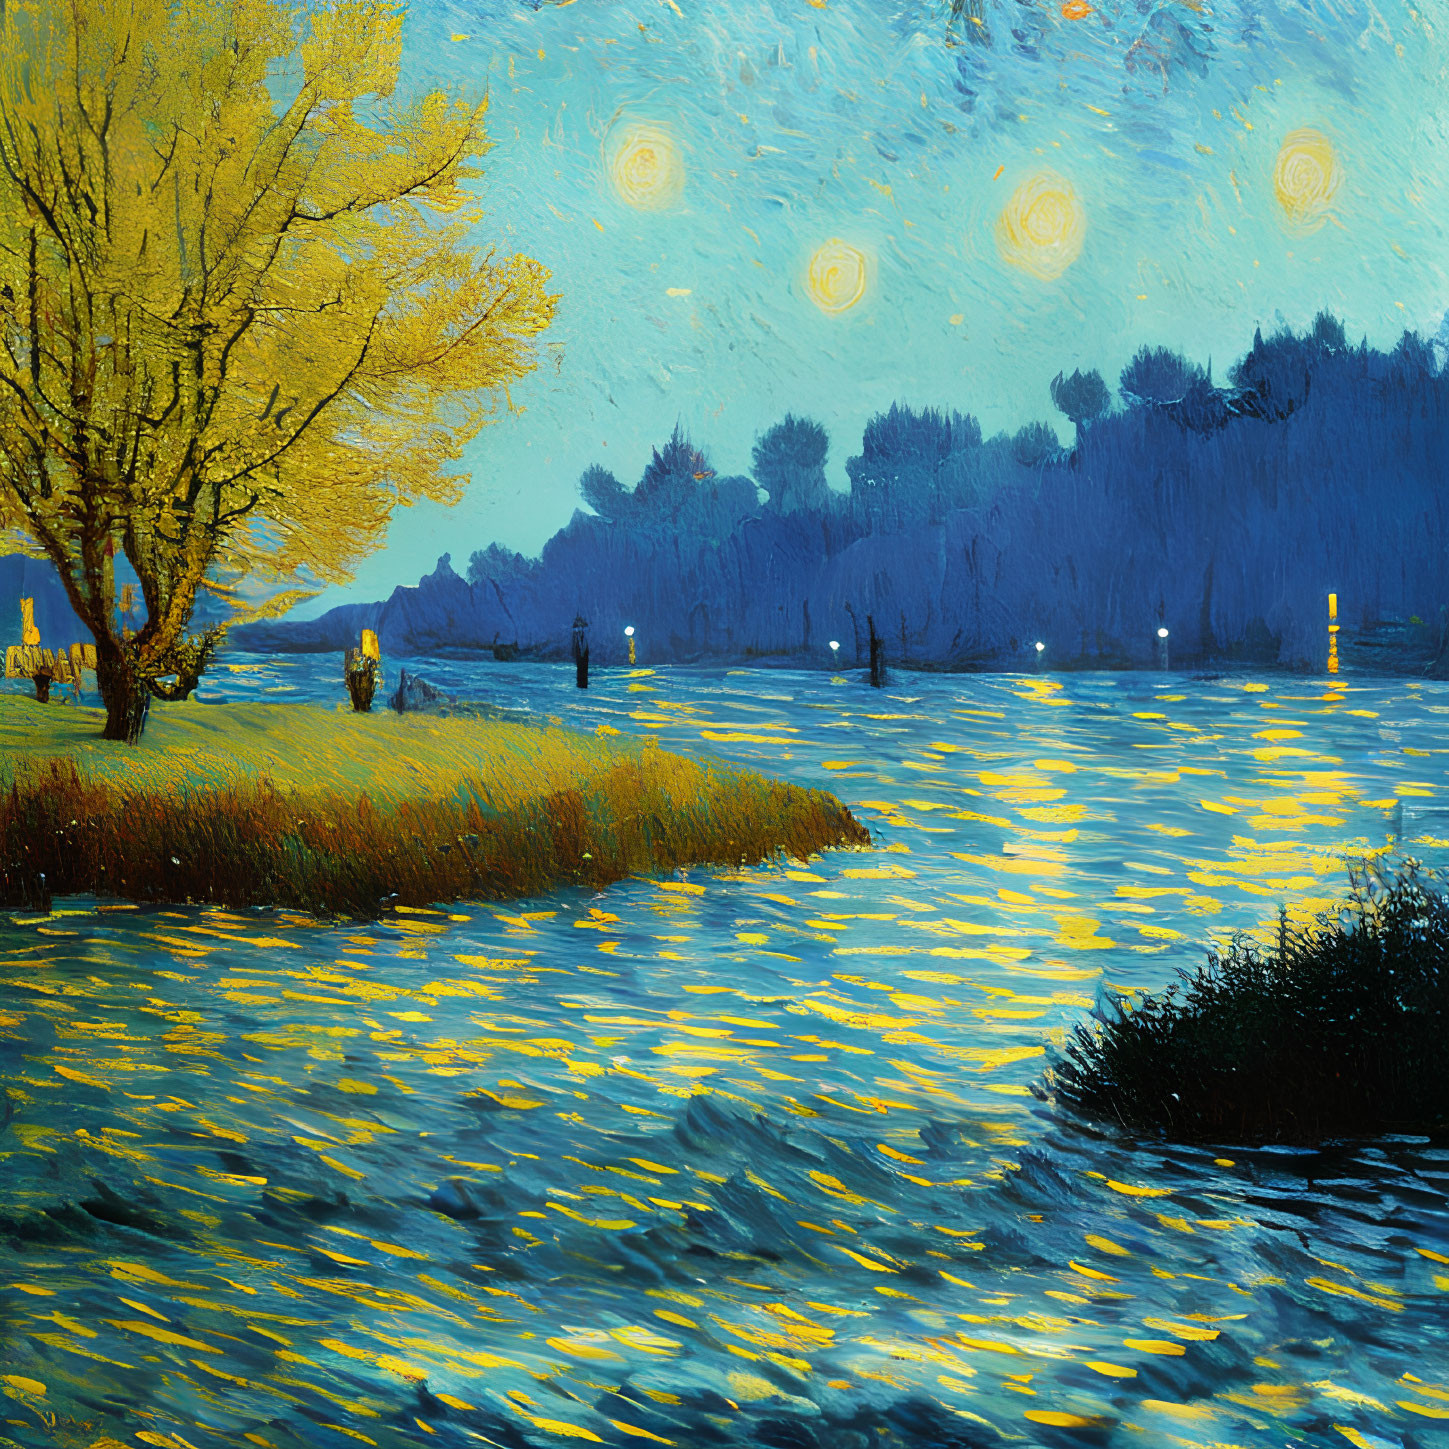 Impressionist painting of starry night over river with glowing yellow tree